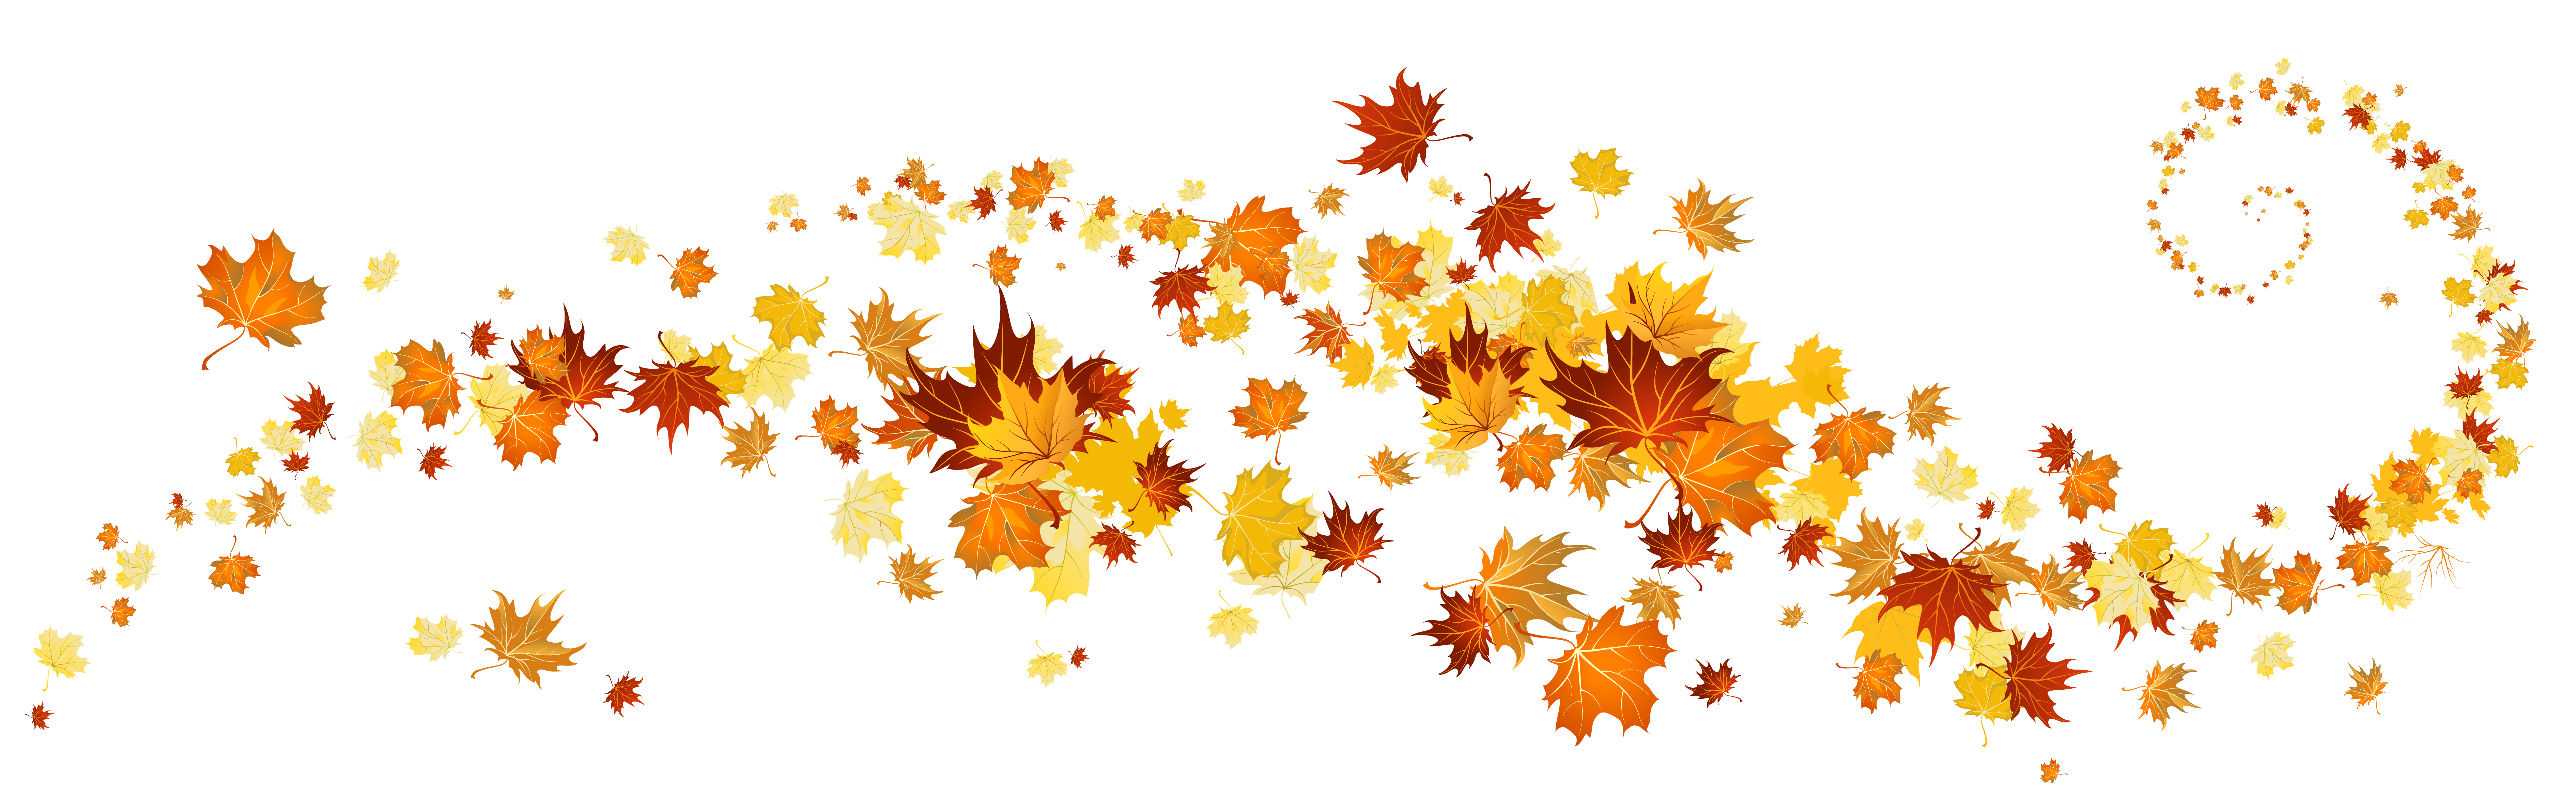 Falling Autumn Leaves Clip Art - Gallery